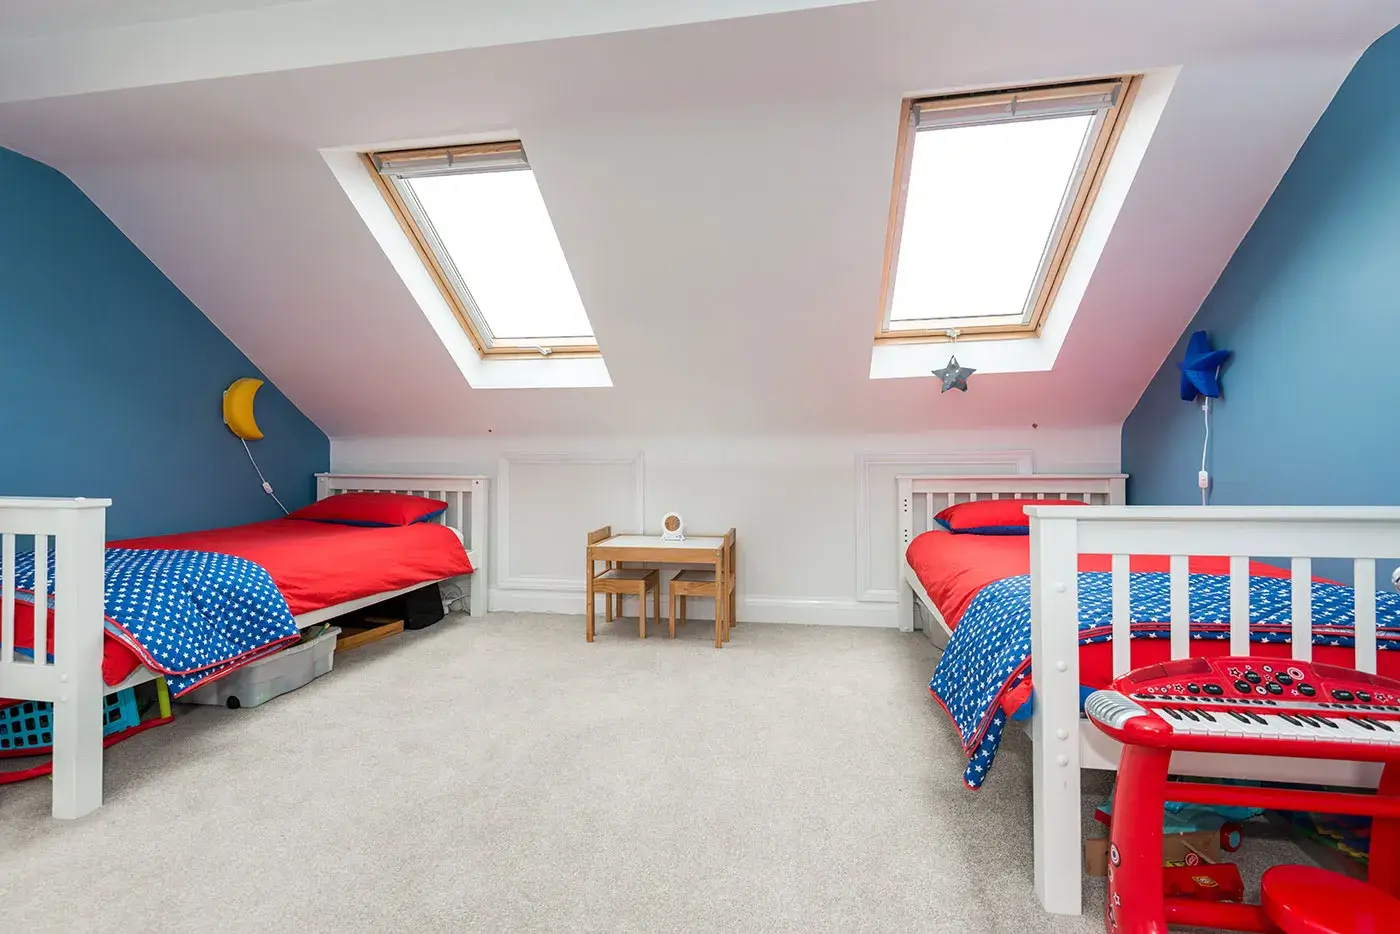 Matching children's beds on either side of dormer loft conversion